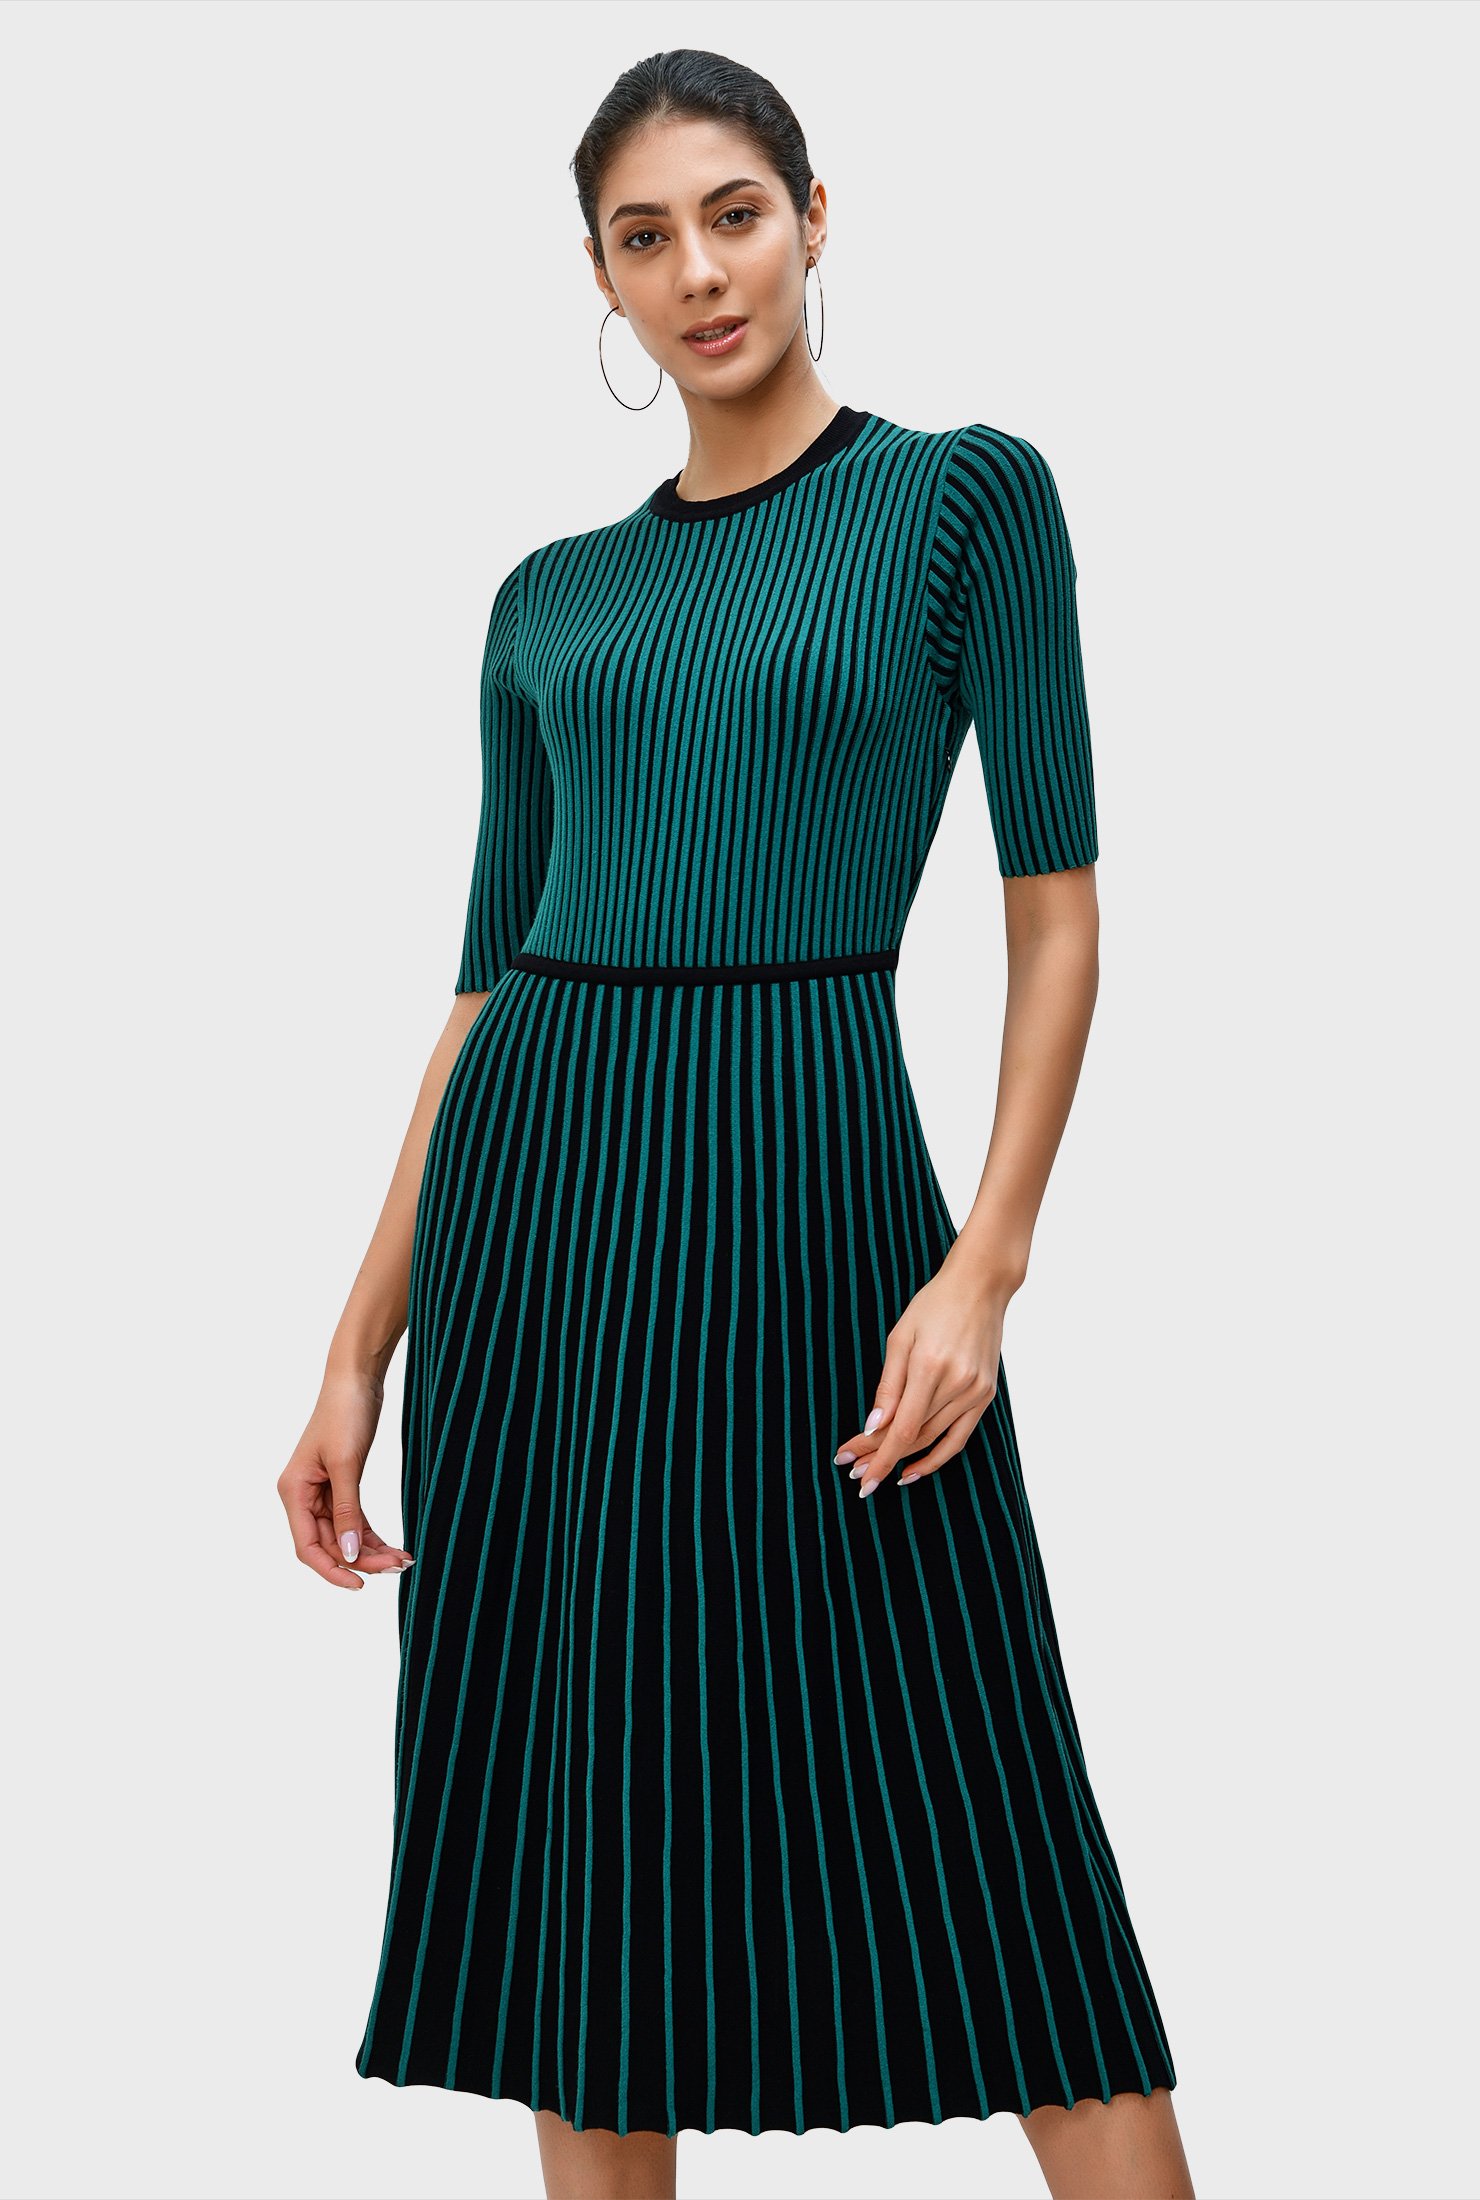 herlipto Trimmed Cable Knit Two-Piece